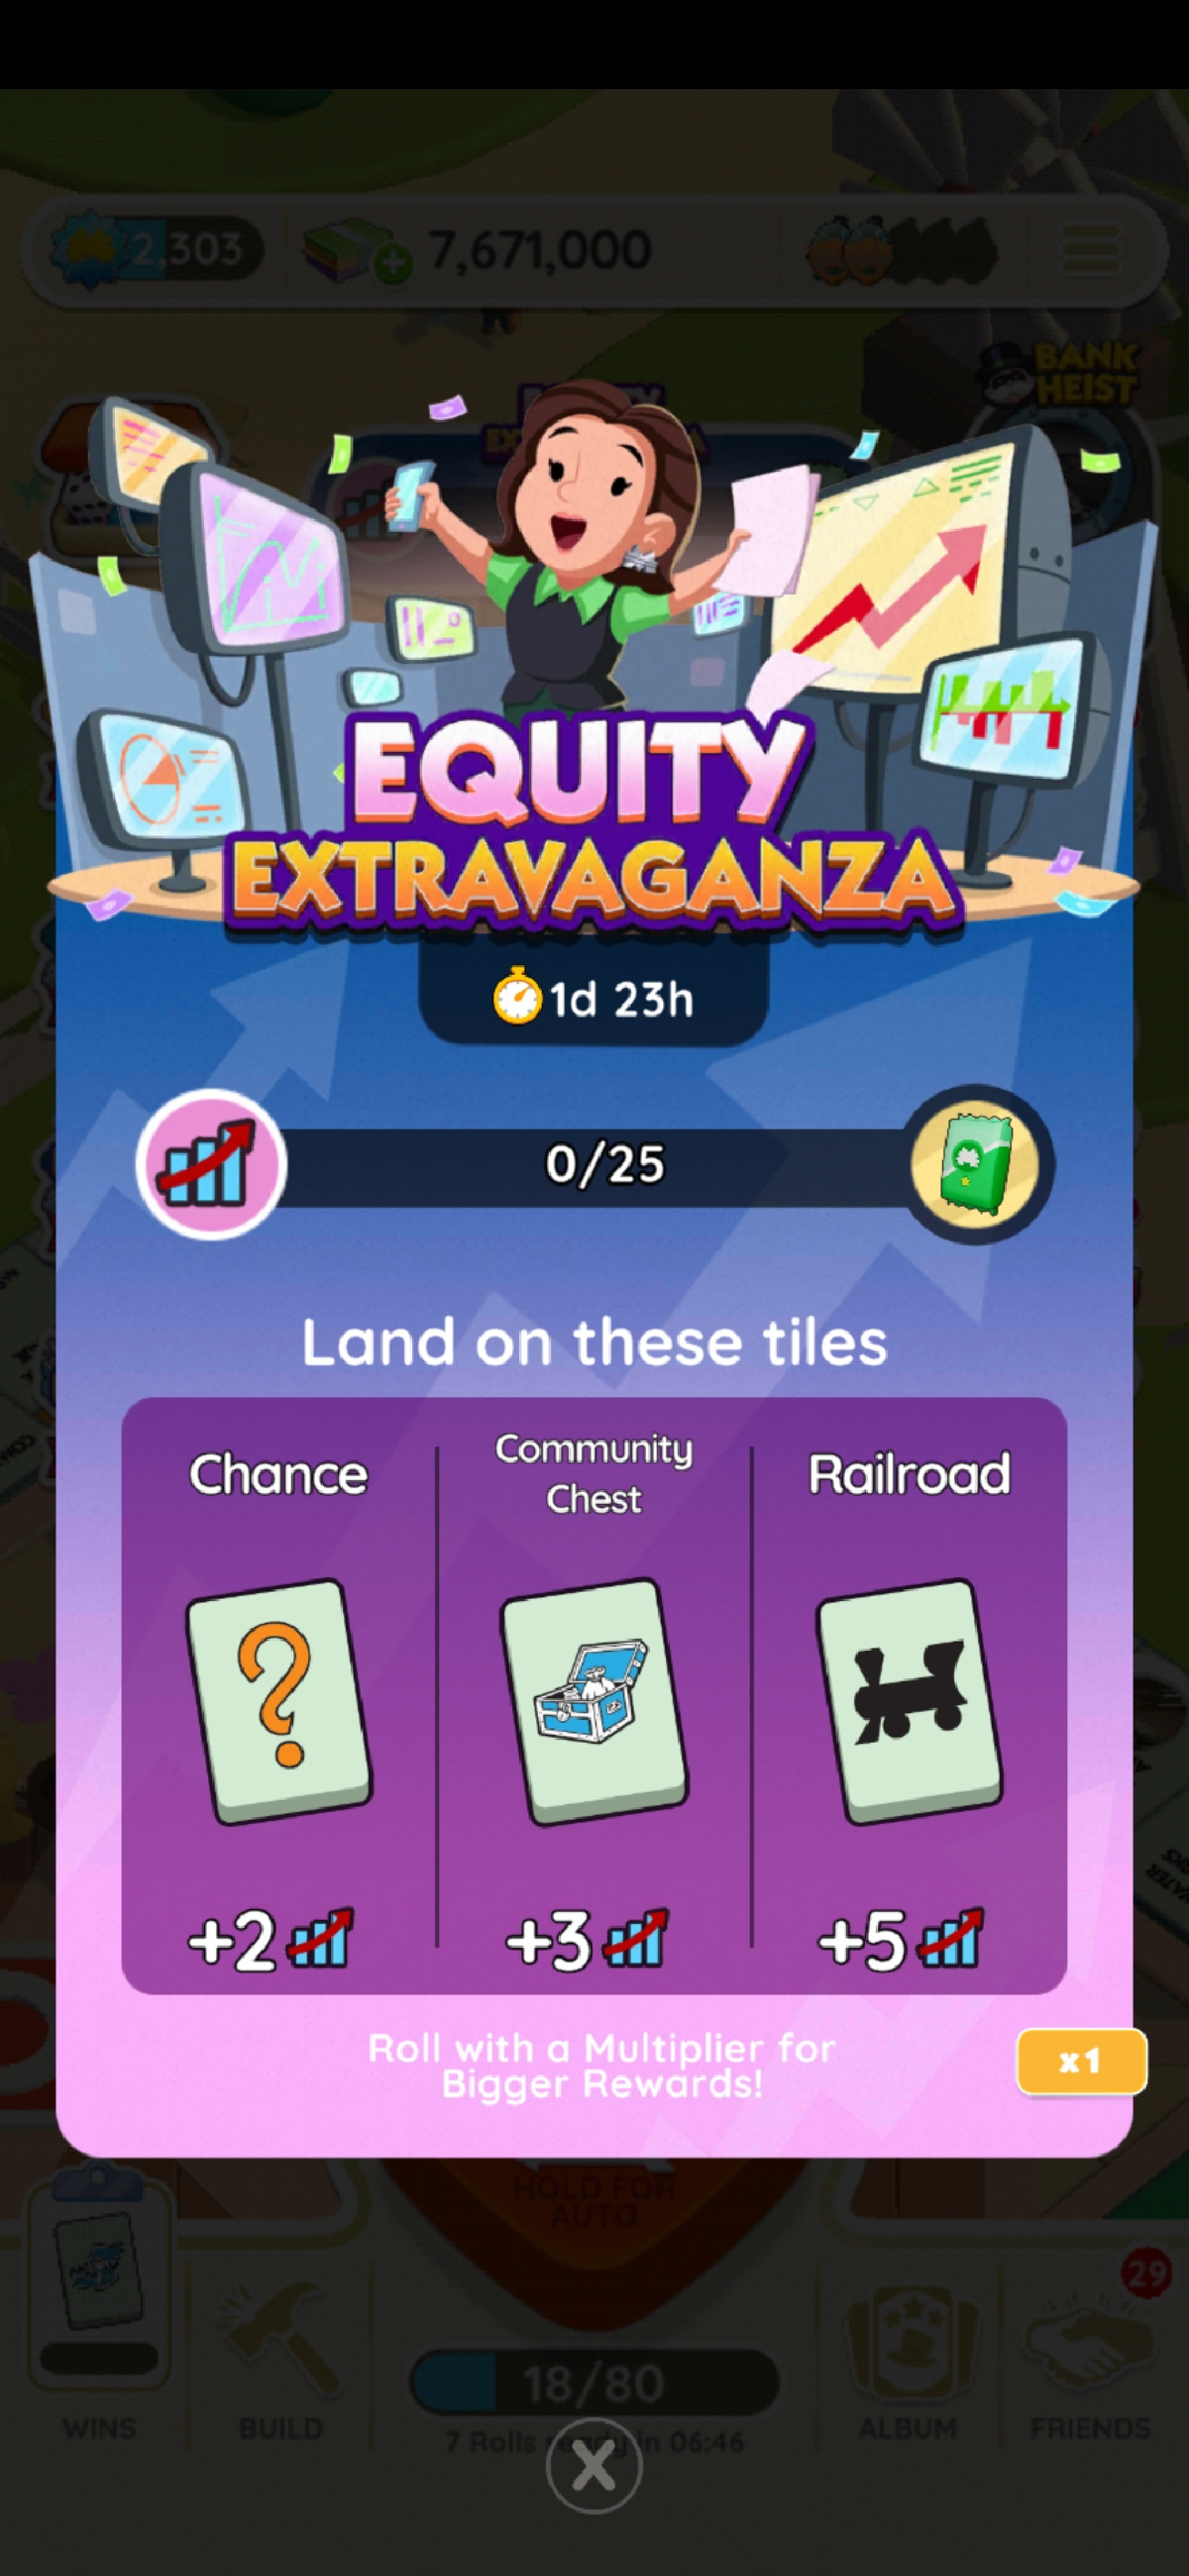 The full rules for the Equity Extravaganza event in Monopoly GO. The image shows a woman holding a cellphone and a pile of papers while she stands surrounded by screens with varying graphs on them. The image is part of an article on all the milestones and rewards for the Equity Extravaganza event in Monopoly GO as well as how the event works and advice for wining at it.